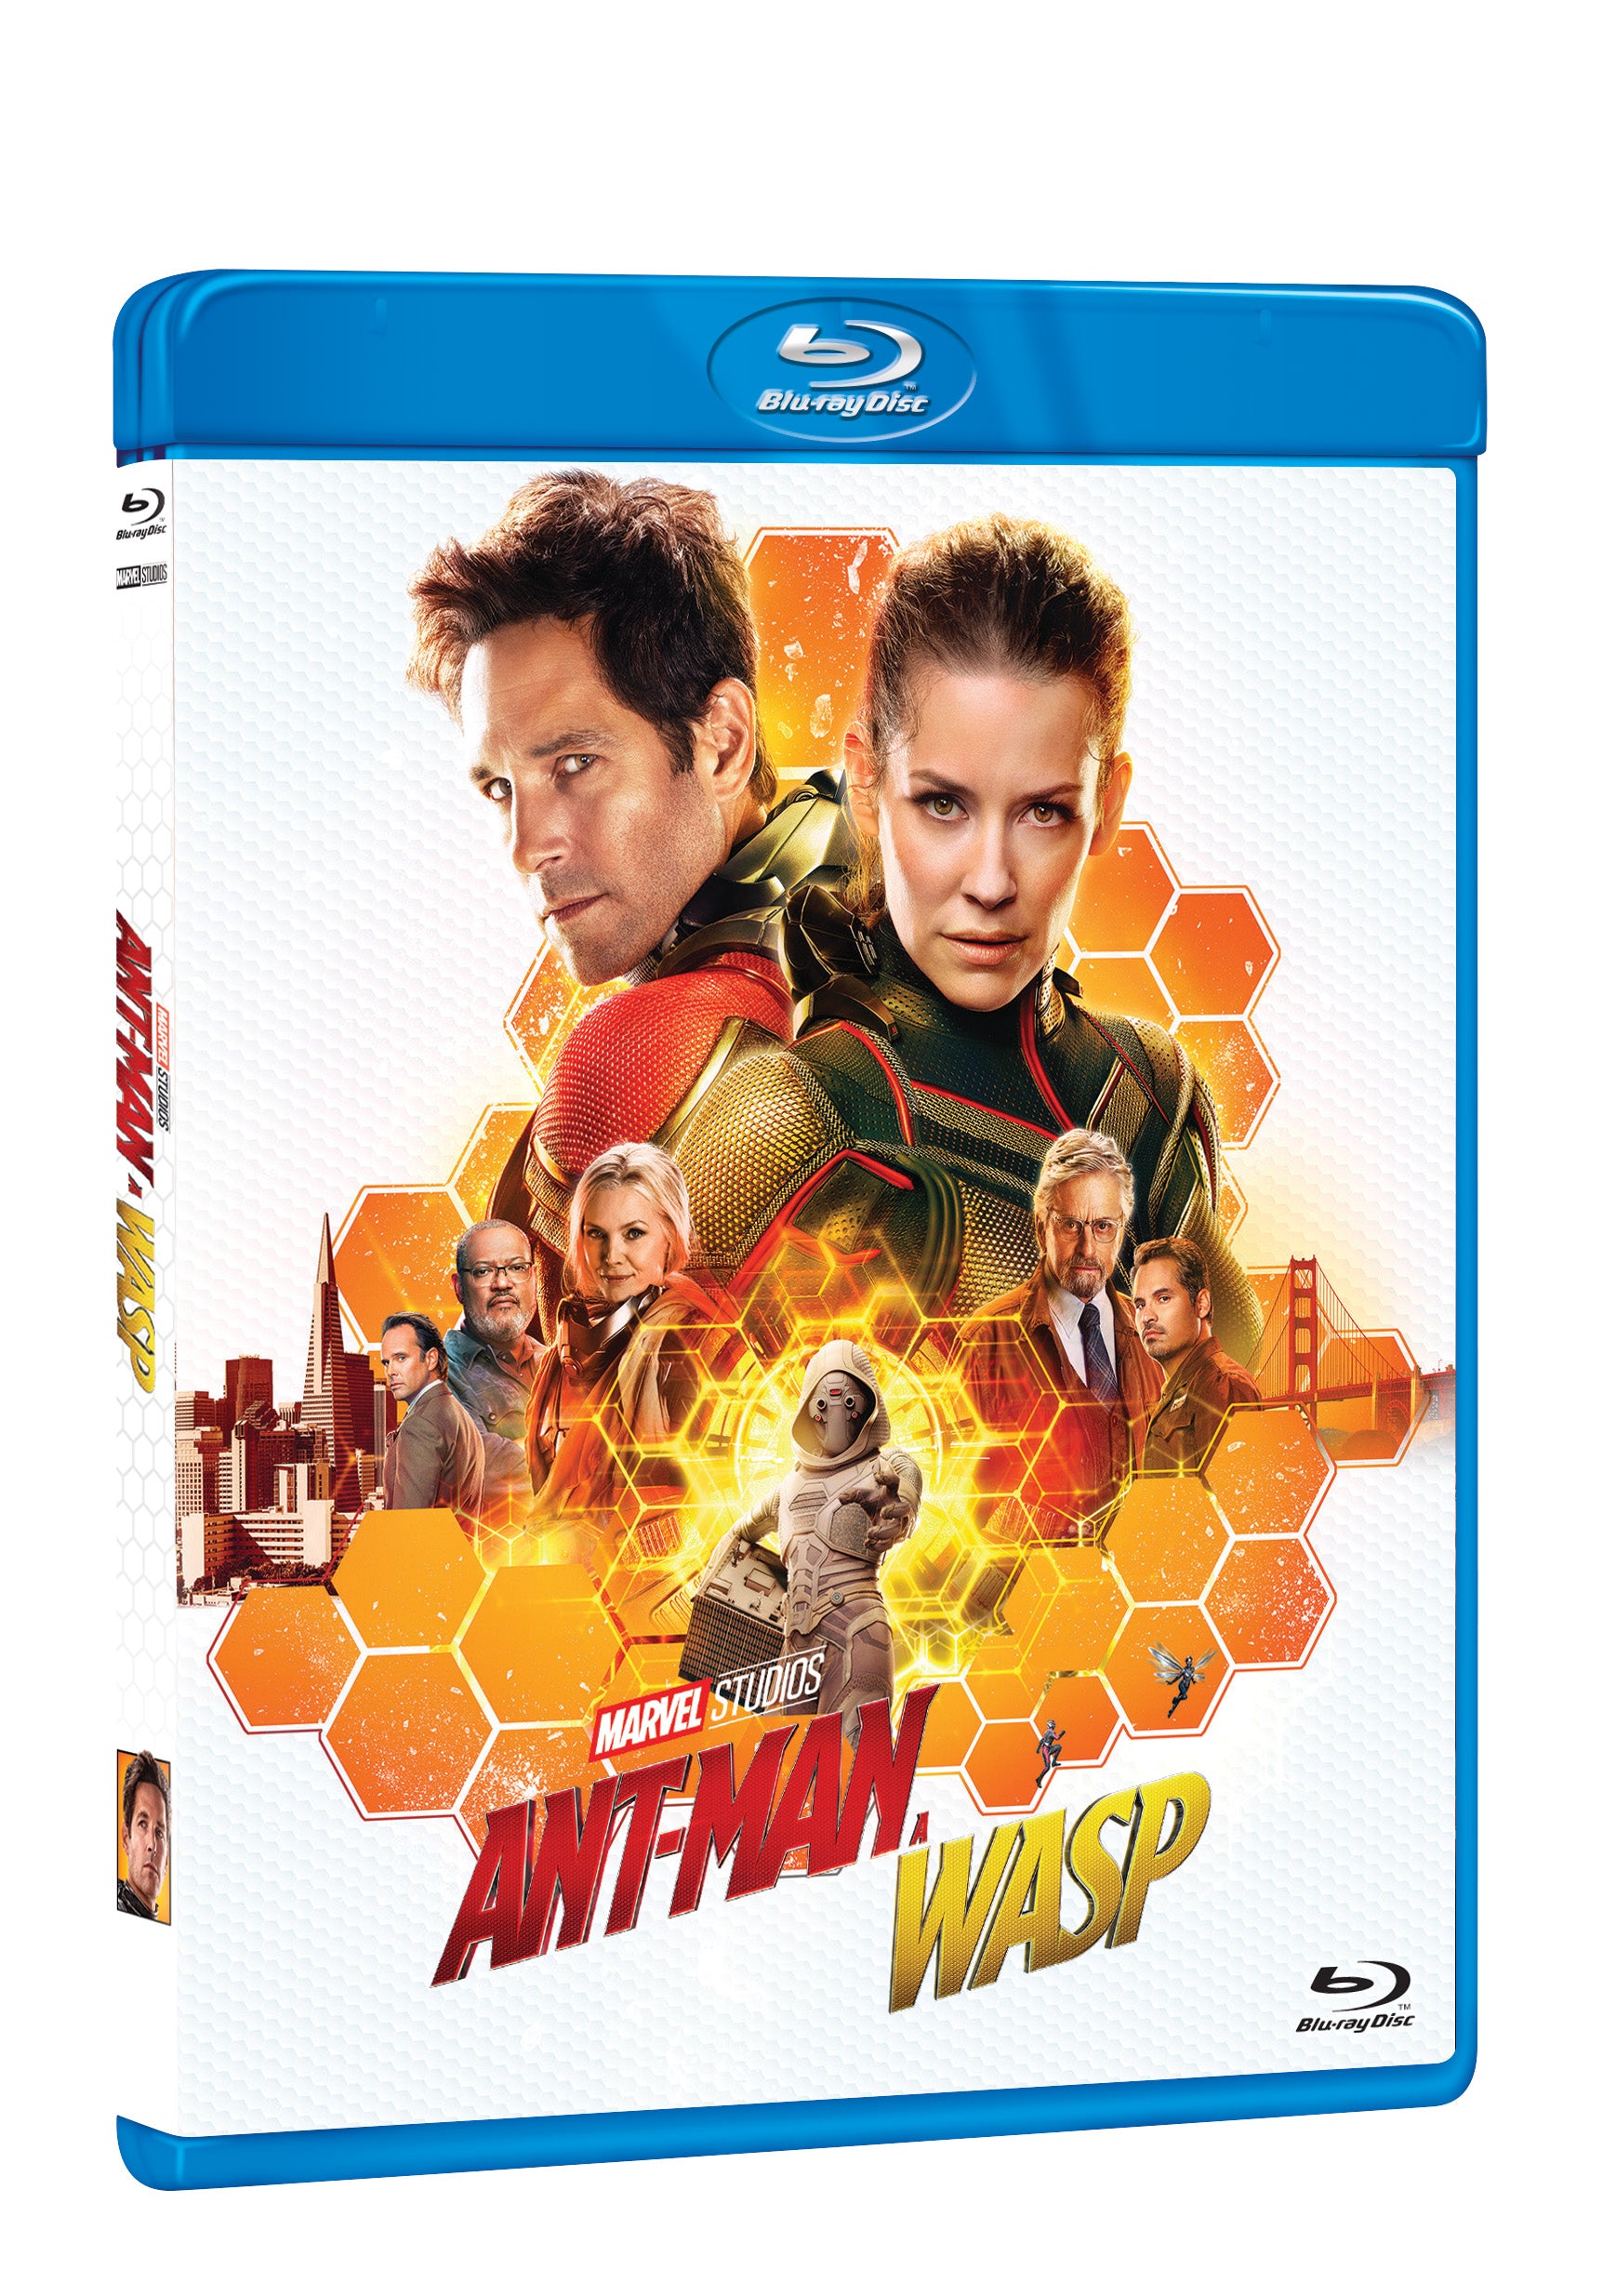 Ant-Man a Wasp BD / Ant-Man and the Wasp - Czech version